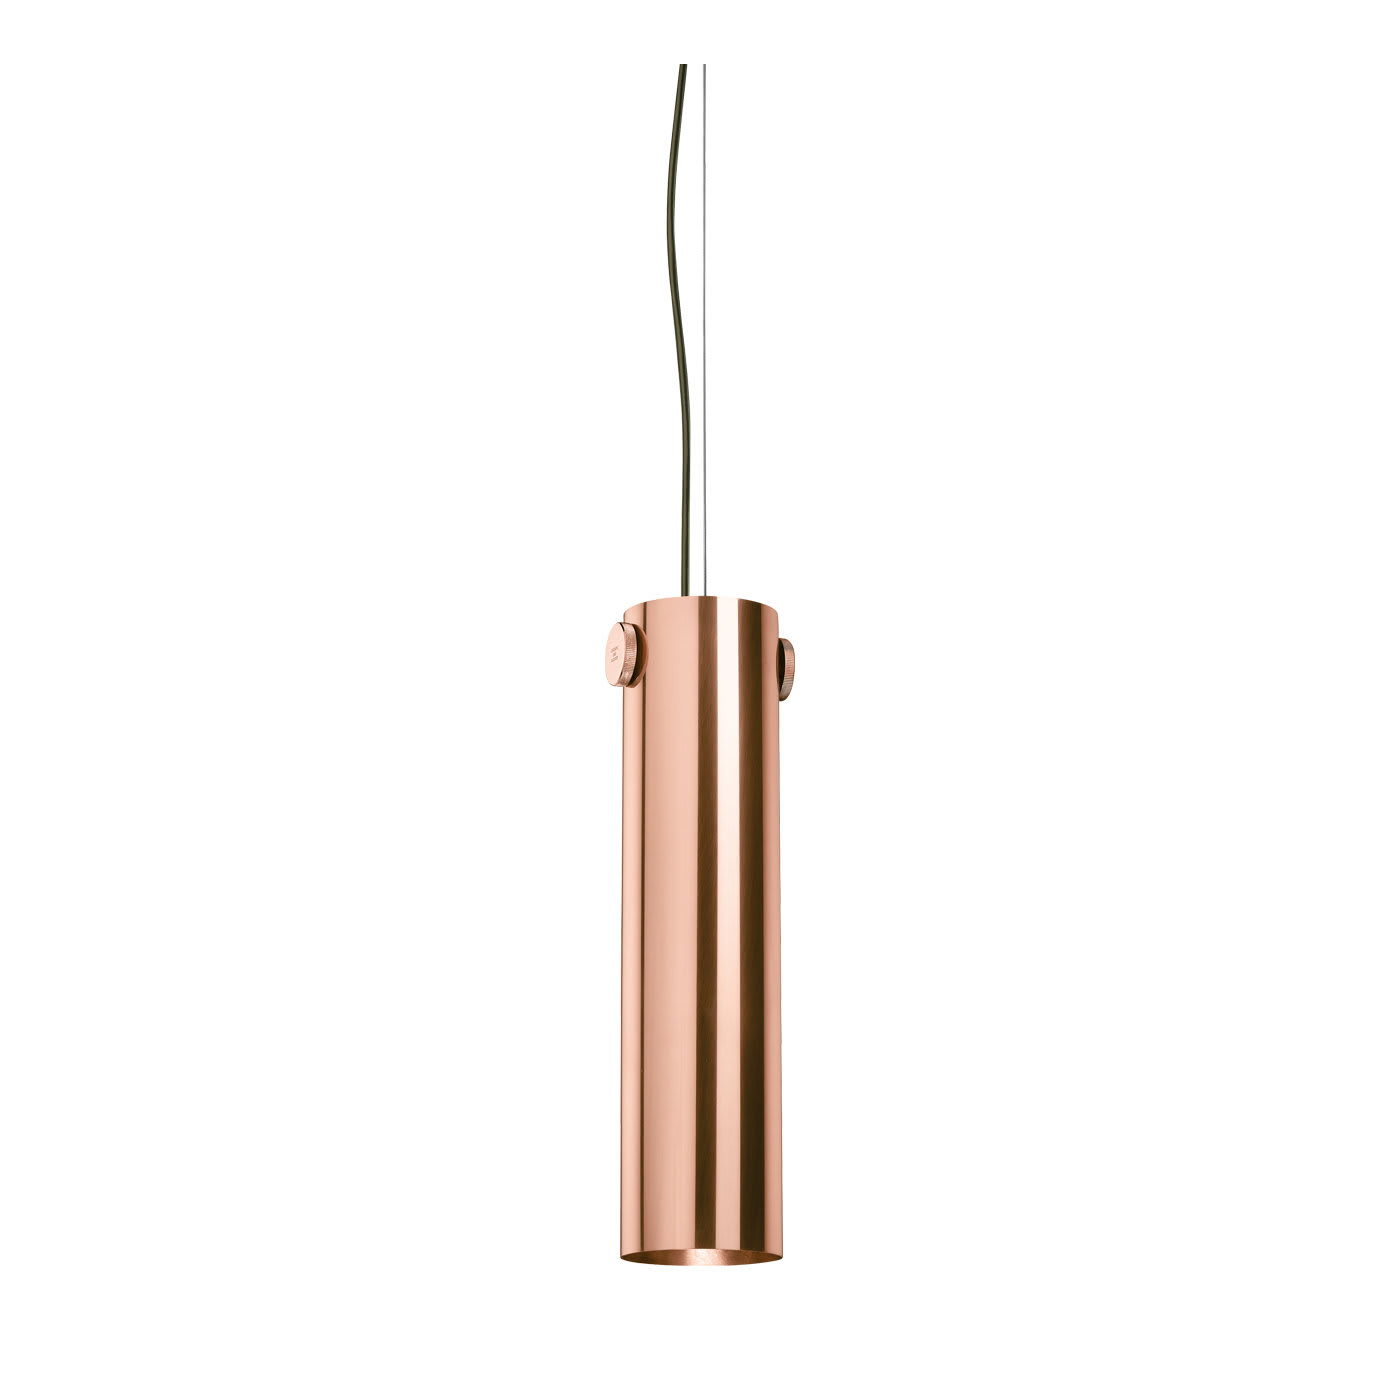 Cylinder Suspension Lamp in Copper By Richard Hutten - Ghidini 1961